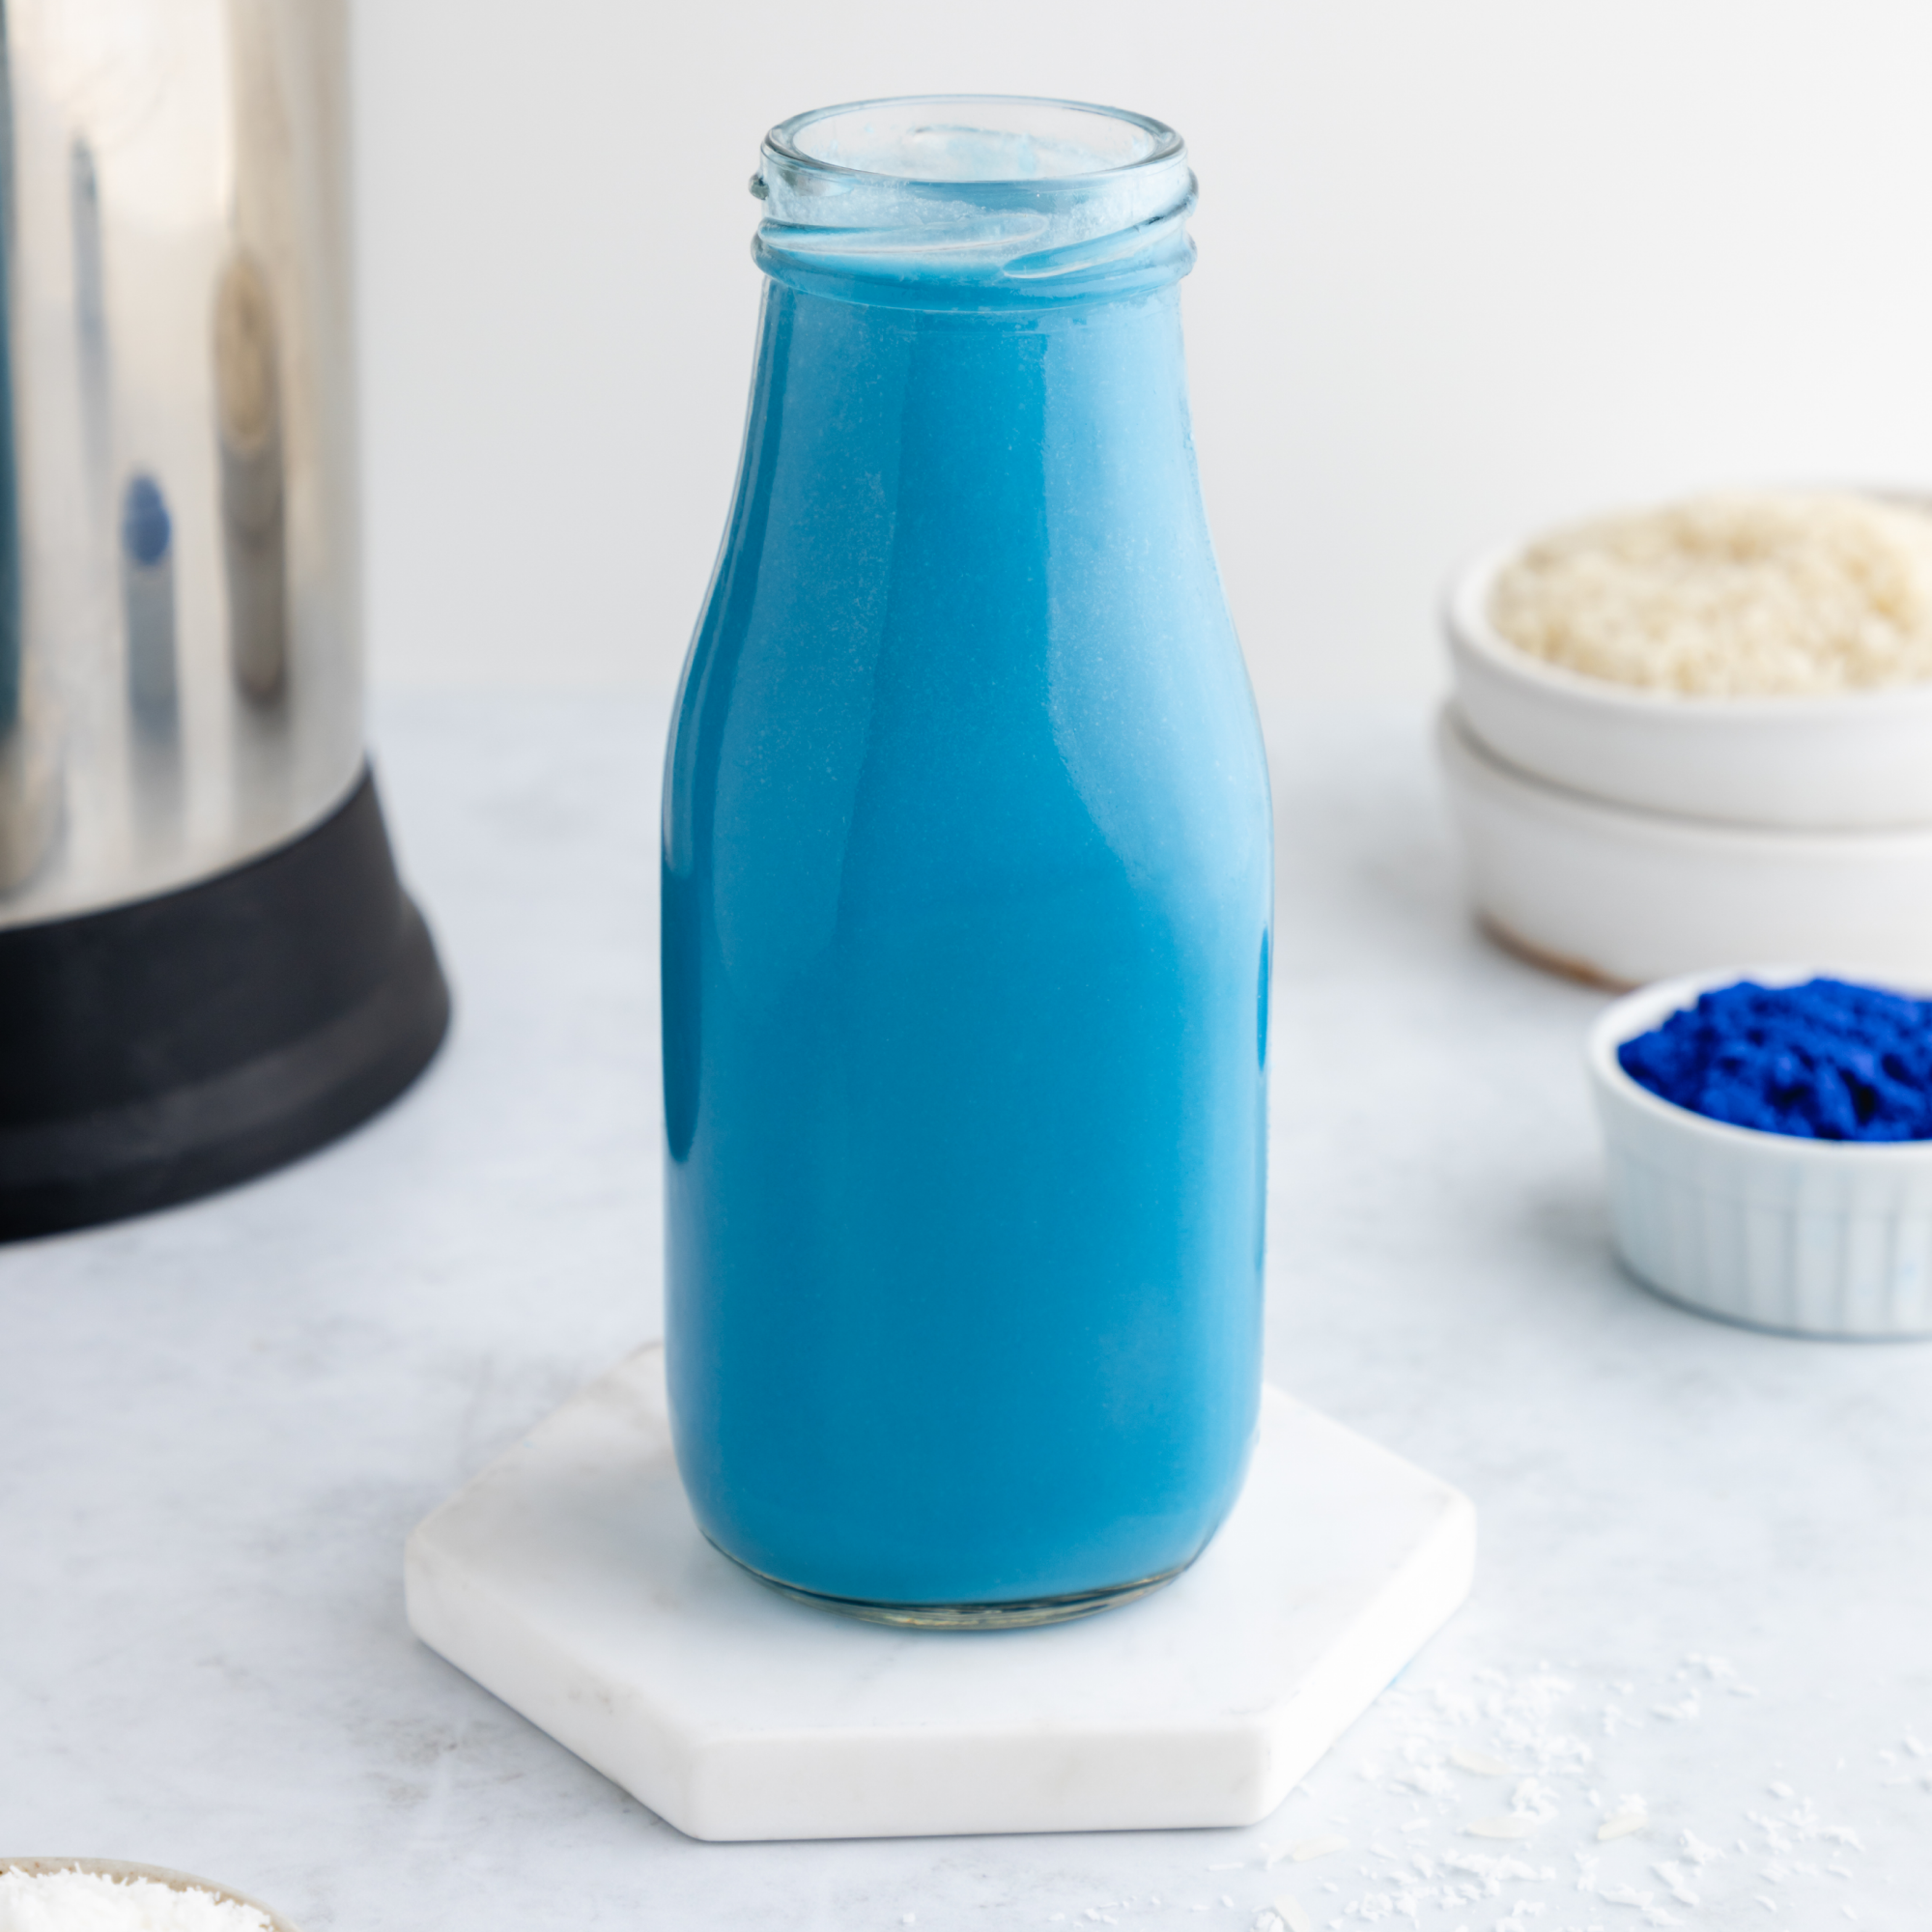 Blue Milk recipe with pineapple, lime, dragon fruit, and blue spirulina for a colorful, delicious, and nutritious beverage